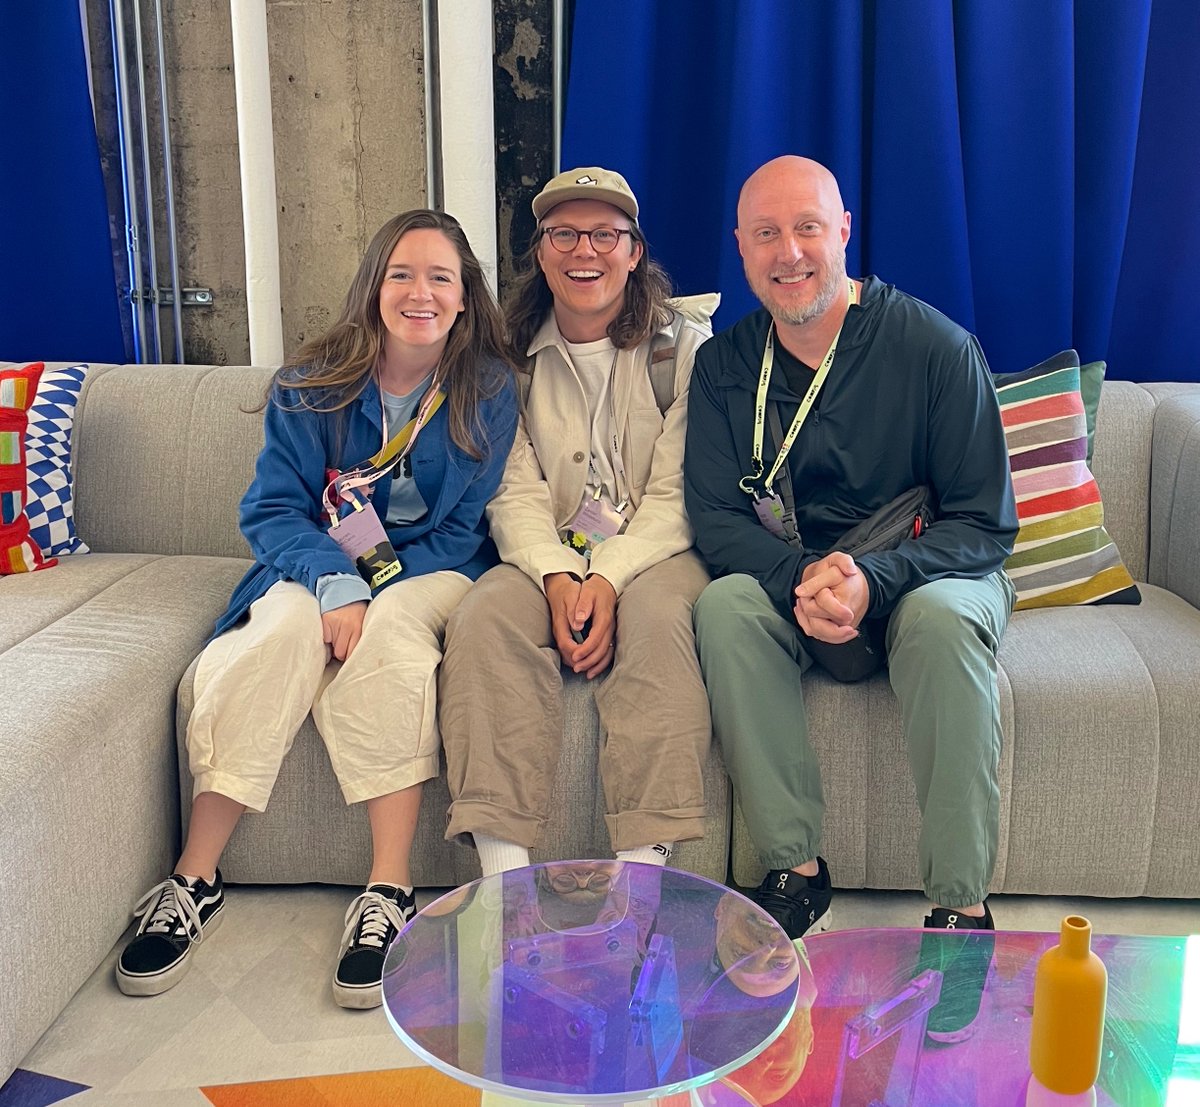 What's this? Well, it is just me chillin' with an amazing human and true gentleman, @zander_supafast, at the @figma home office in San Fran. We had a great day with host extraordinaire @lemmccann and the charming @lilibustosli (who I didn't get a pic with 🫤). Thanks, friends!